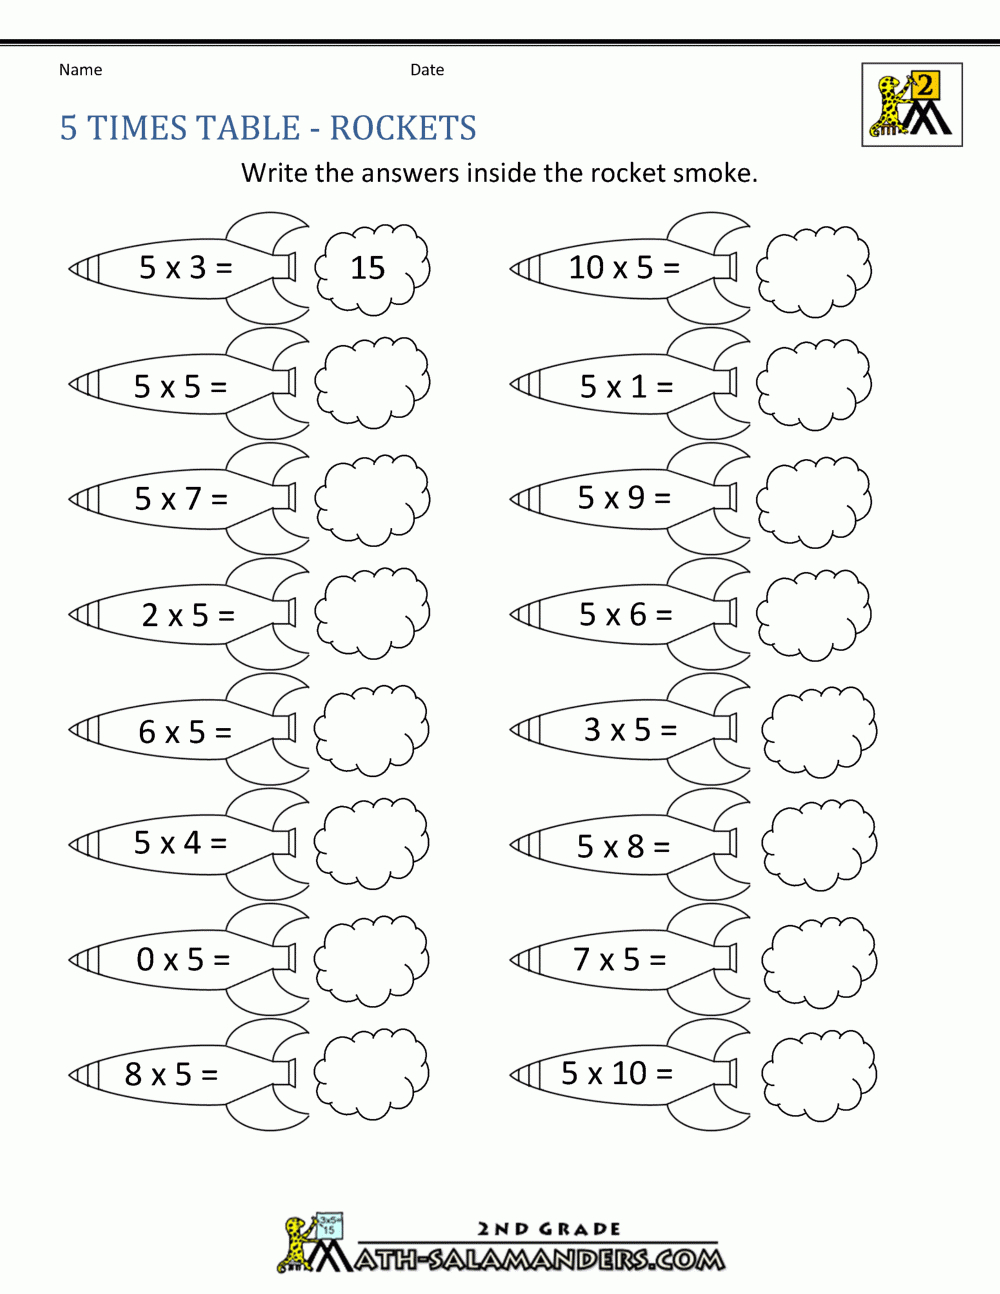 5 Times Table - 2Nd Grade Math Salamanders pertaining to Multiplication Worksheets 5 Times Tables